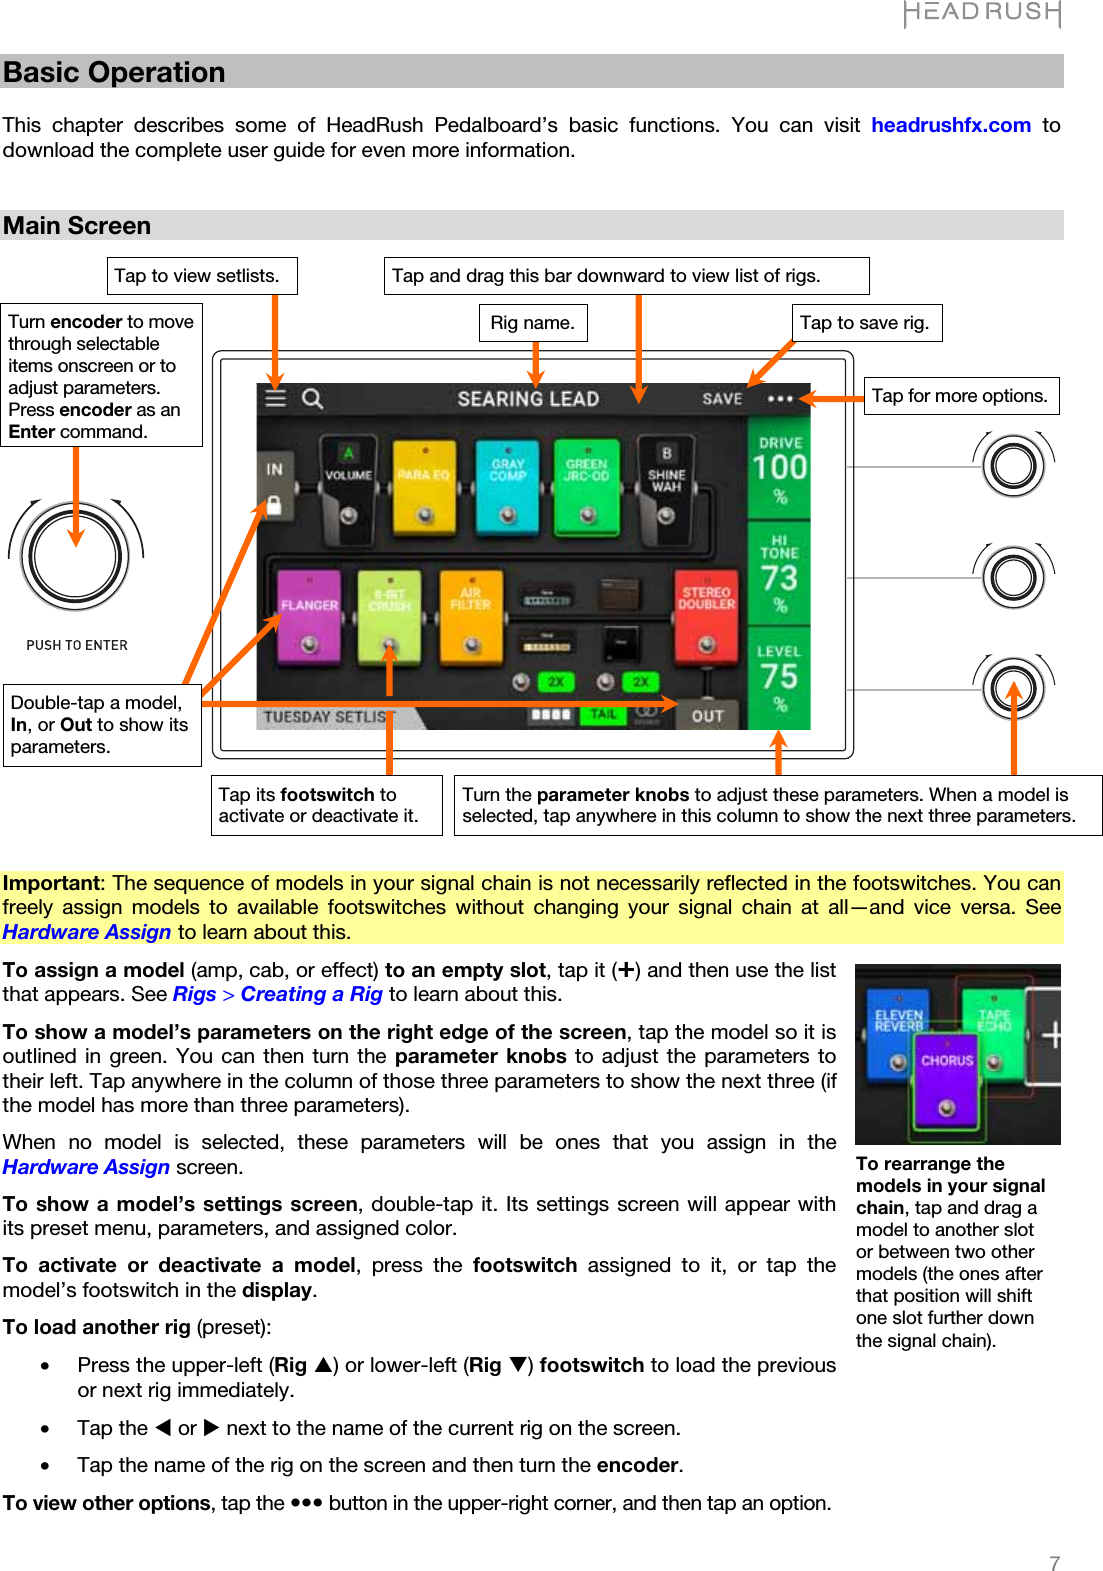   7   Basic Operation  This chapter describes some of HeadRush Pedalboard’s basic functions. You can visit headrushfx.com to download the complete user guide for even more information.   Main Screen                            Important: The sequence of models in your signal chain is not necessarily reflected in the footswitches. You can freely assign models to available footswitches without changing your signal chain at all—and vice versa. See Hardware Assign to learn about this. To assign a model (amp, cab, or effect) to an empty slot, tap it (¬) and then use the list that appears. See Rigs &gt; Creating a Rig to learn about this.  To show a model’s parameters on the right edge of the screen, tap the model so it is outlined in green. You can then turn the parameter knobs to adjust the parameters to their left. Tap anywhere in the column of those three parameters to show the next three (if the model has more than three parameters). When no model is selected, these parameters will be ones that you assign in the Hardware Assign screen. To show a model’s settings screen, double-tap it. Its settings screen will appear with its preset menu, parameters, and assigned color. To activate or deactivate a model, press the footswitch assigned to it, or tap the model’s footswitch in the display. To load another rig (preset): •Press the upper-left (Rig S) or lower-left (Rig T) footswitch to load the previous or next rig immediately. •Tap the W or X next to the name of the current rig on the screen. •Tap the name of the rig on the screen and then turn the encoder. To view other options, tap the yyy button in the upper-right corner, and then tap an option. To rearrange the models in your signal chain, tap and drag a model to another slot or between two other models (the ones after that position will shift one slot further down the signal chain). Tap and drag this bar downward to view list of rigs. Rig name.Double-tap a model, In, or Out to show its parameters. Turn the parameter knobs to adjust these parameters. When a model is selected, tap anywhere in this column to show the next three parameters. Tap for more options.Tap to save rig. Turn encoder to move through selectable items onscreen or to adjust parameters. Press encoder as an Entercommand.Tap its footswitch to activate or deactivate it. Tap to view setlists.